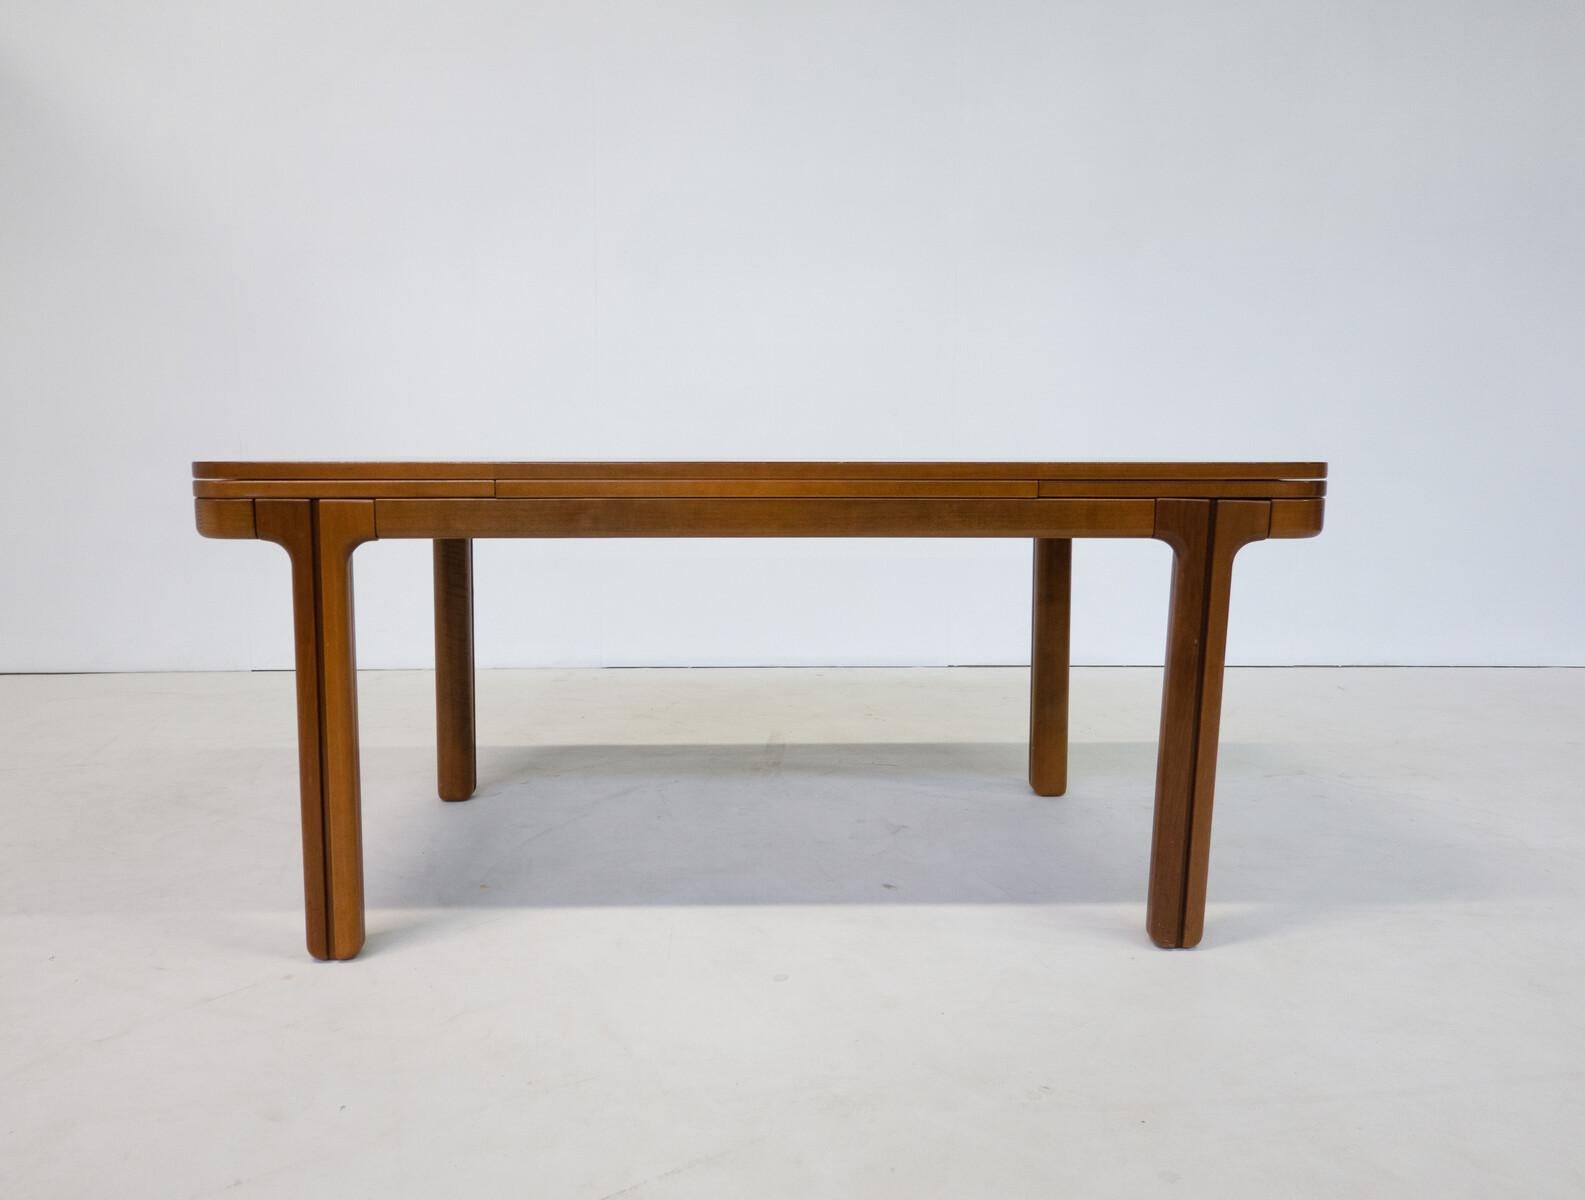 Mid-Century Modern Extendable Dining Table by Llmari Tapiovaara, Finland, 1950s For Sale 2